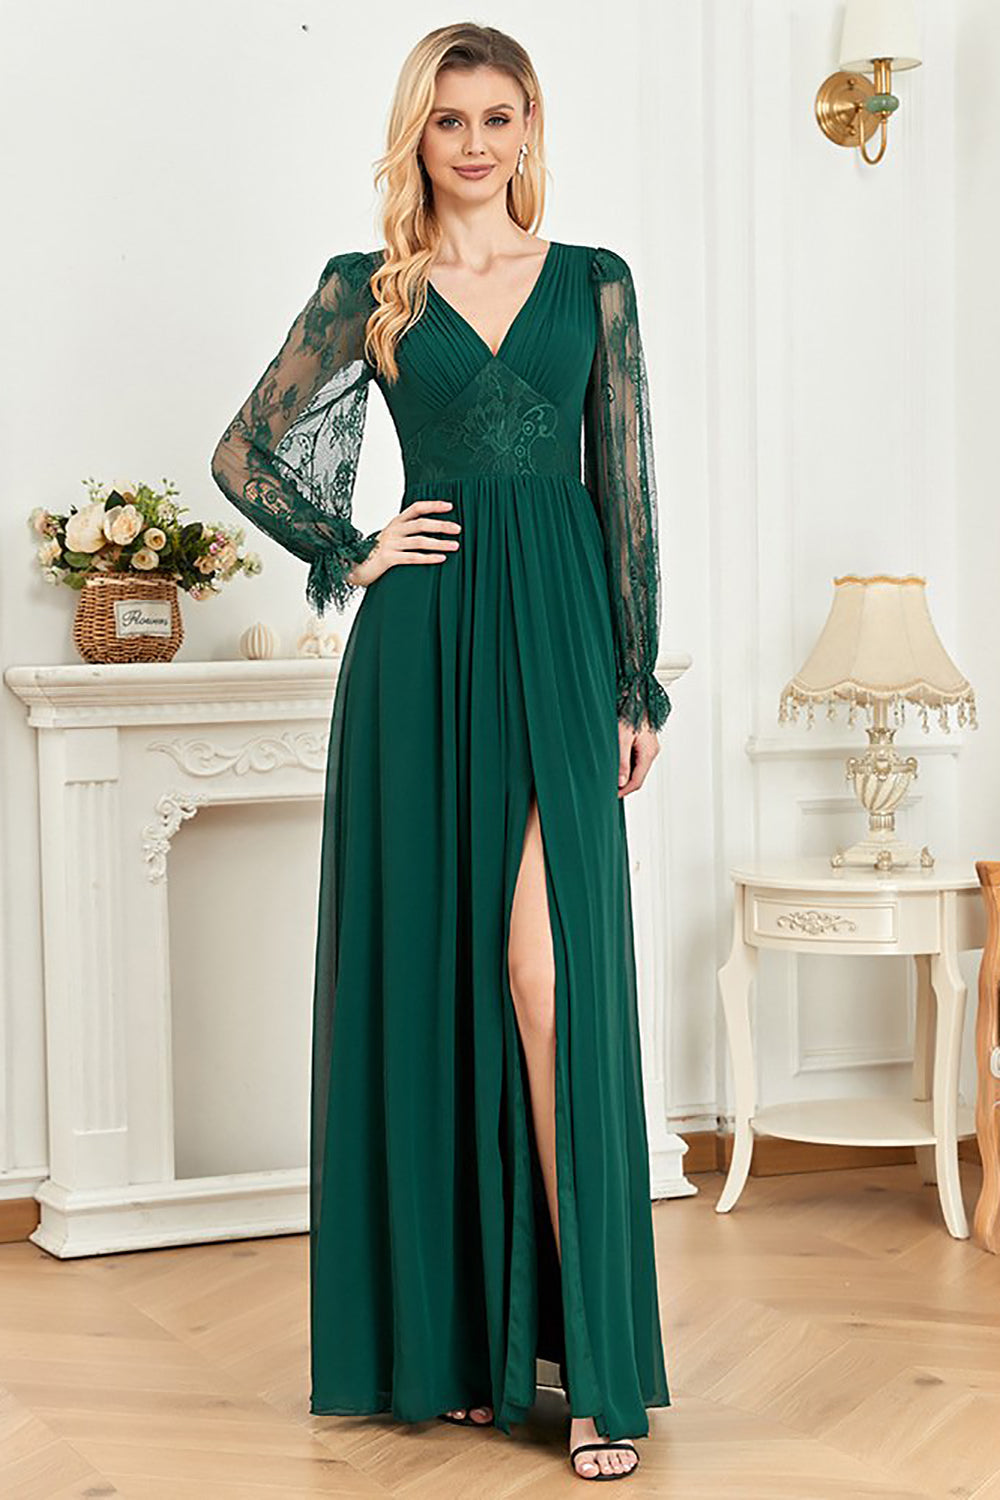 Dark Green Lace Long SLeeves A Line Formal Dress